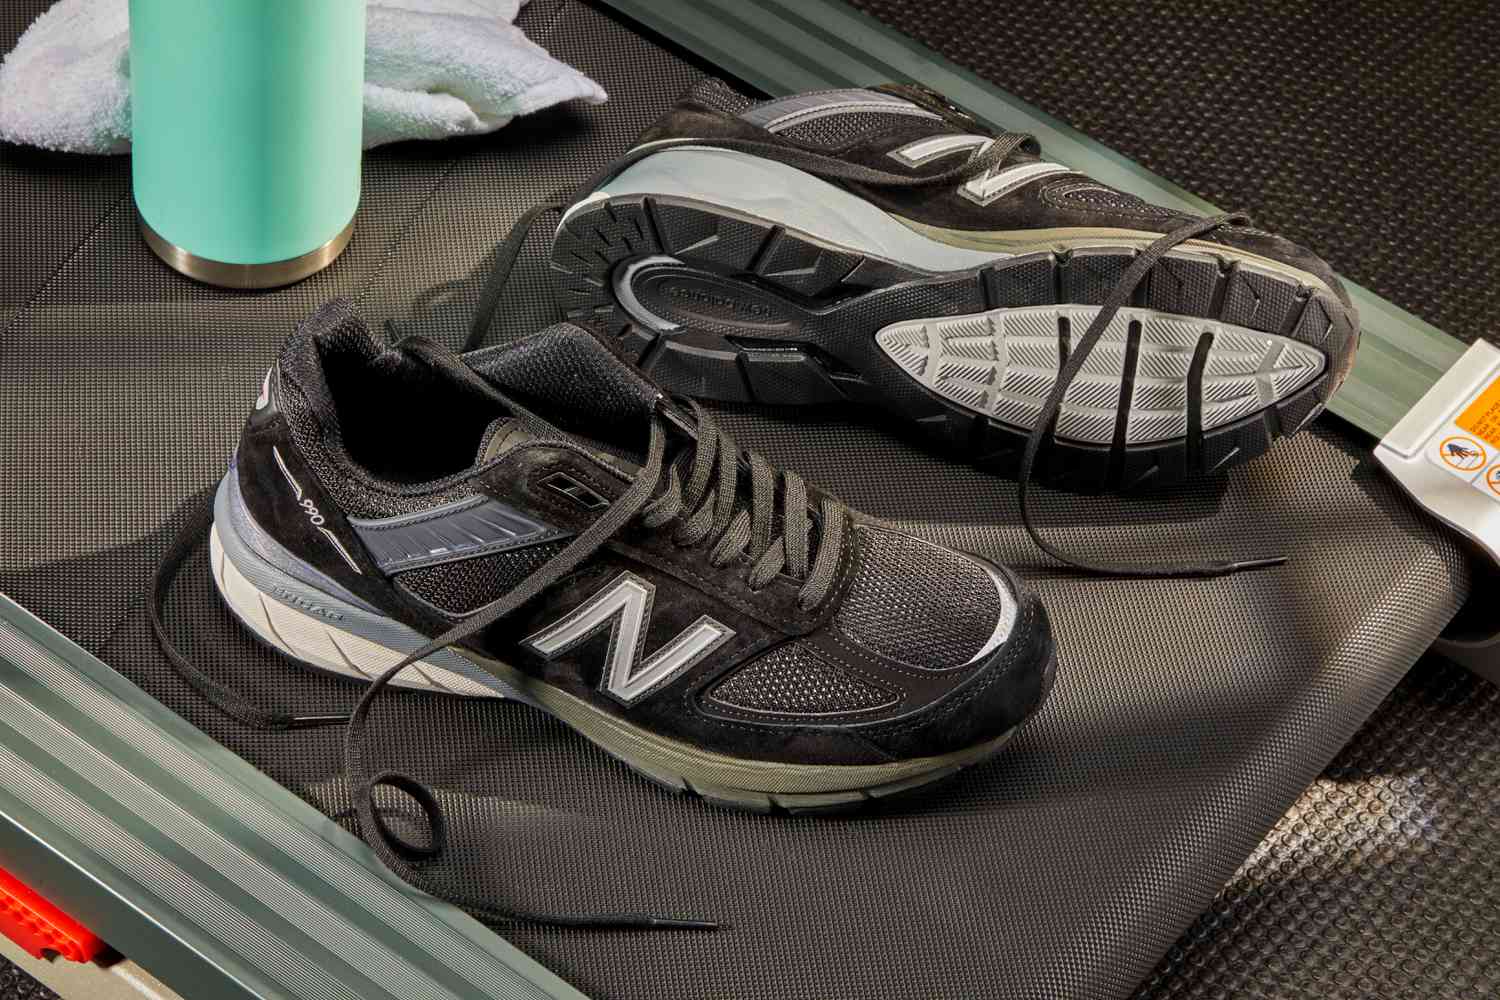 New Balance Men’s M990v5 Running Shoes displayed on the end of a treadmill